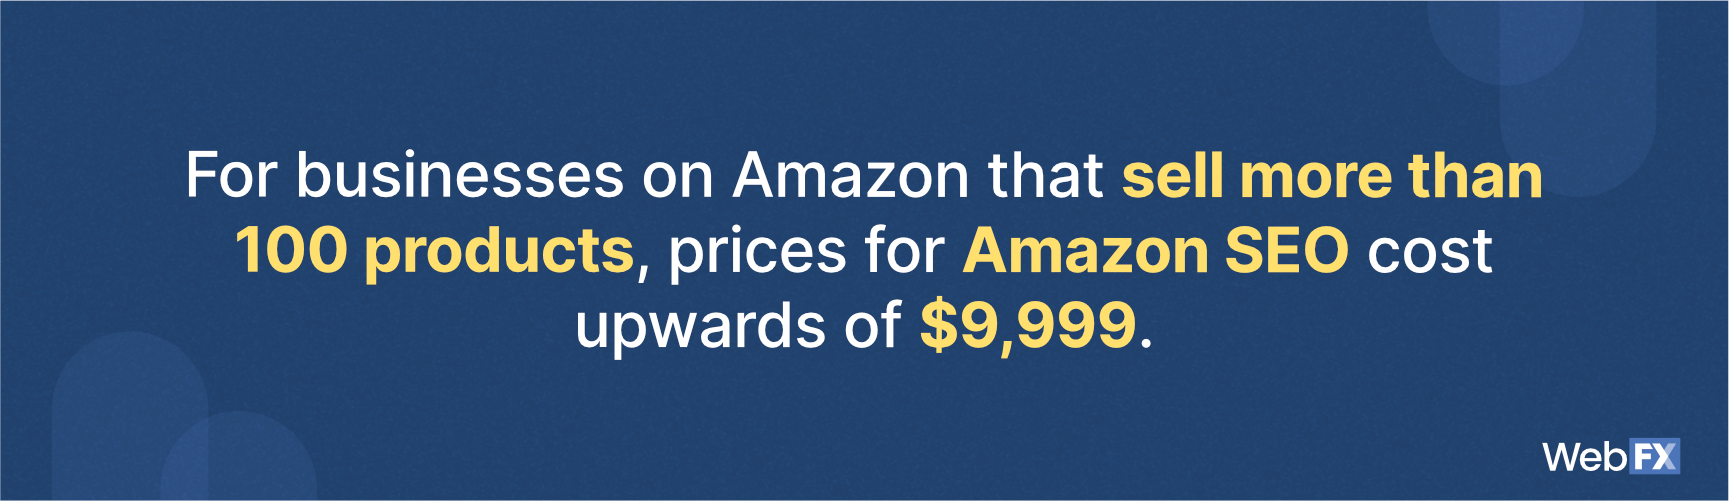 Amazon SEO pricing for businesses that sell 100-plus products